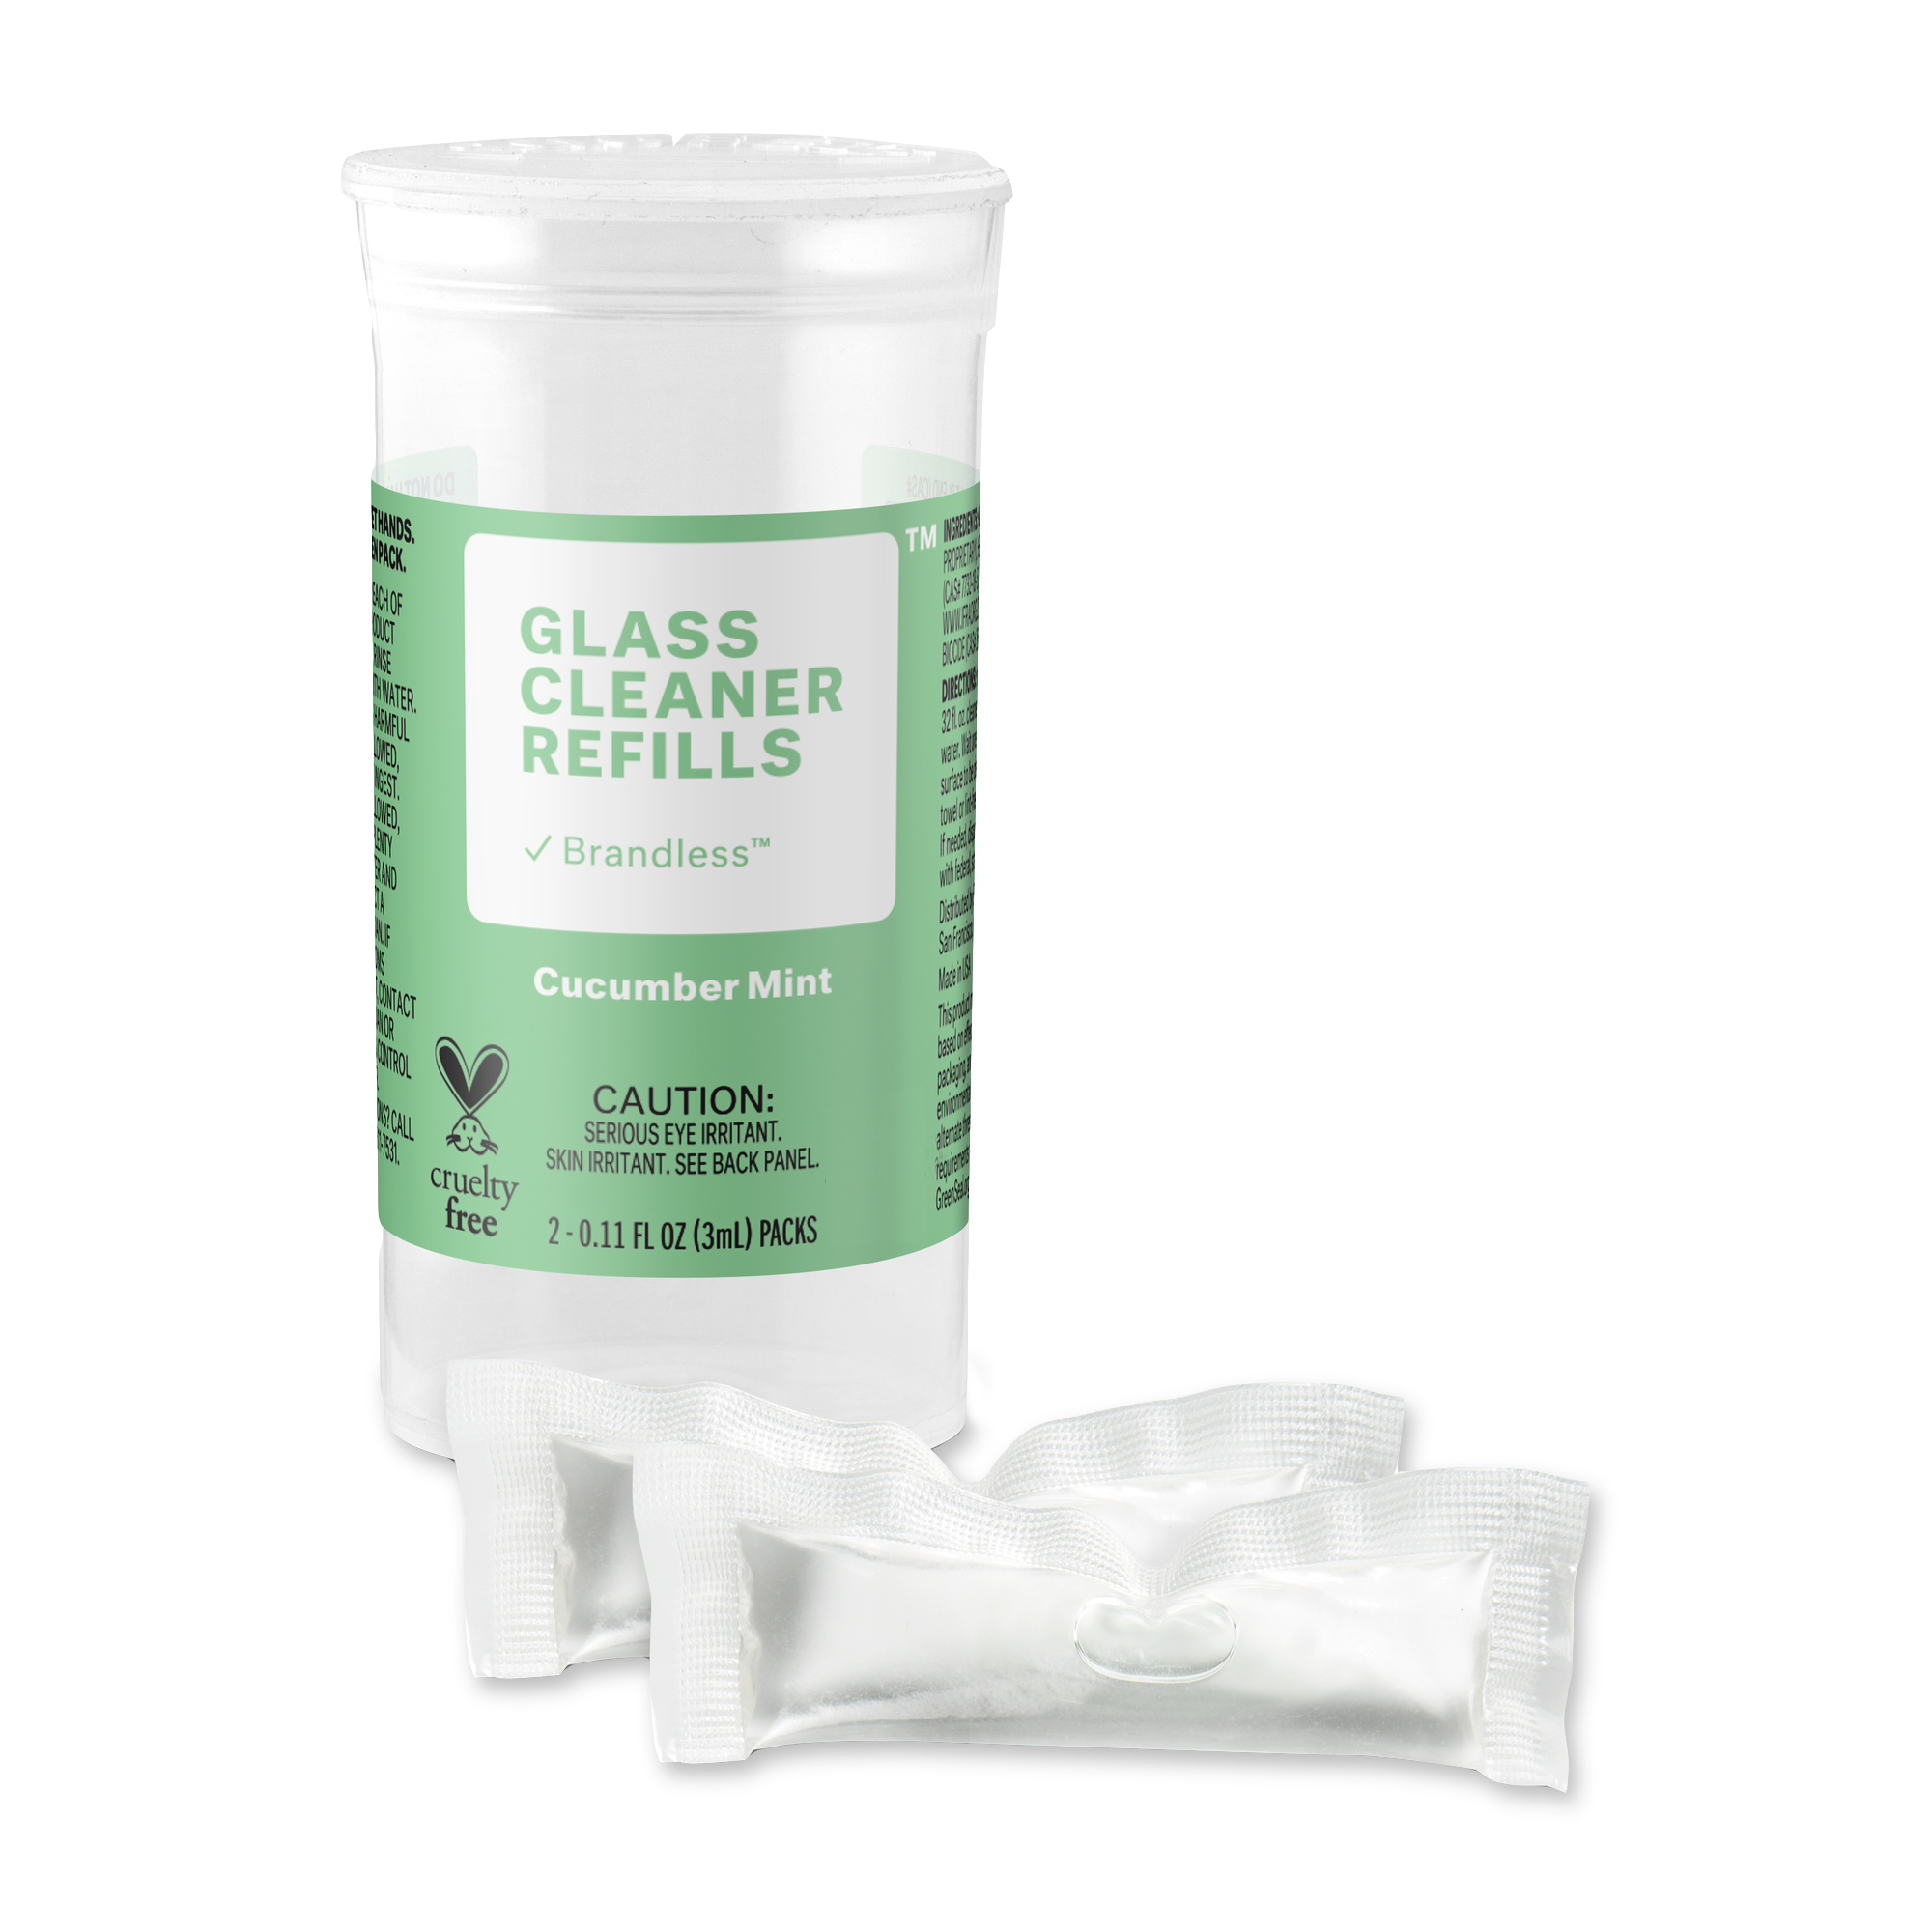 Glass Cleaner refill packet close up view